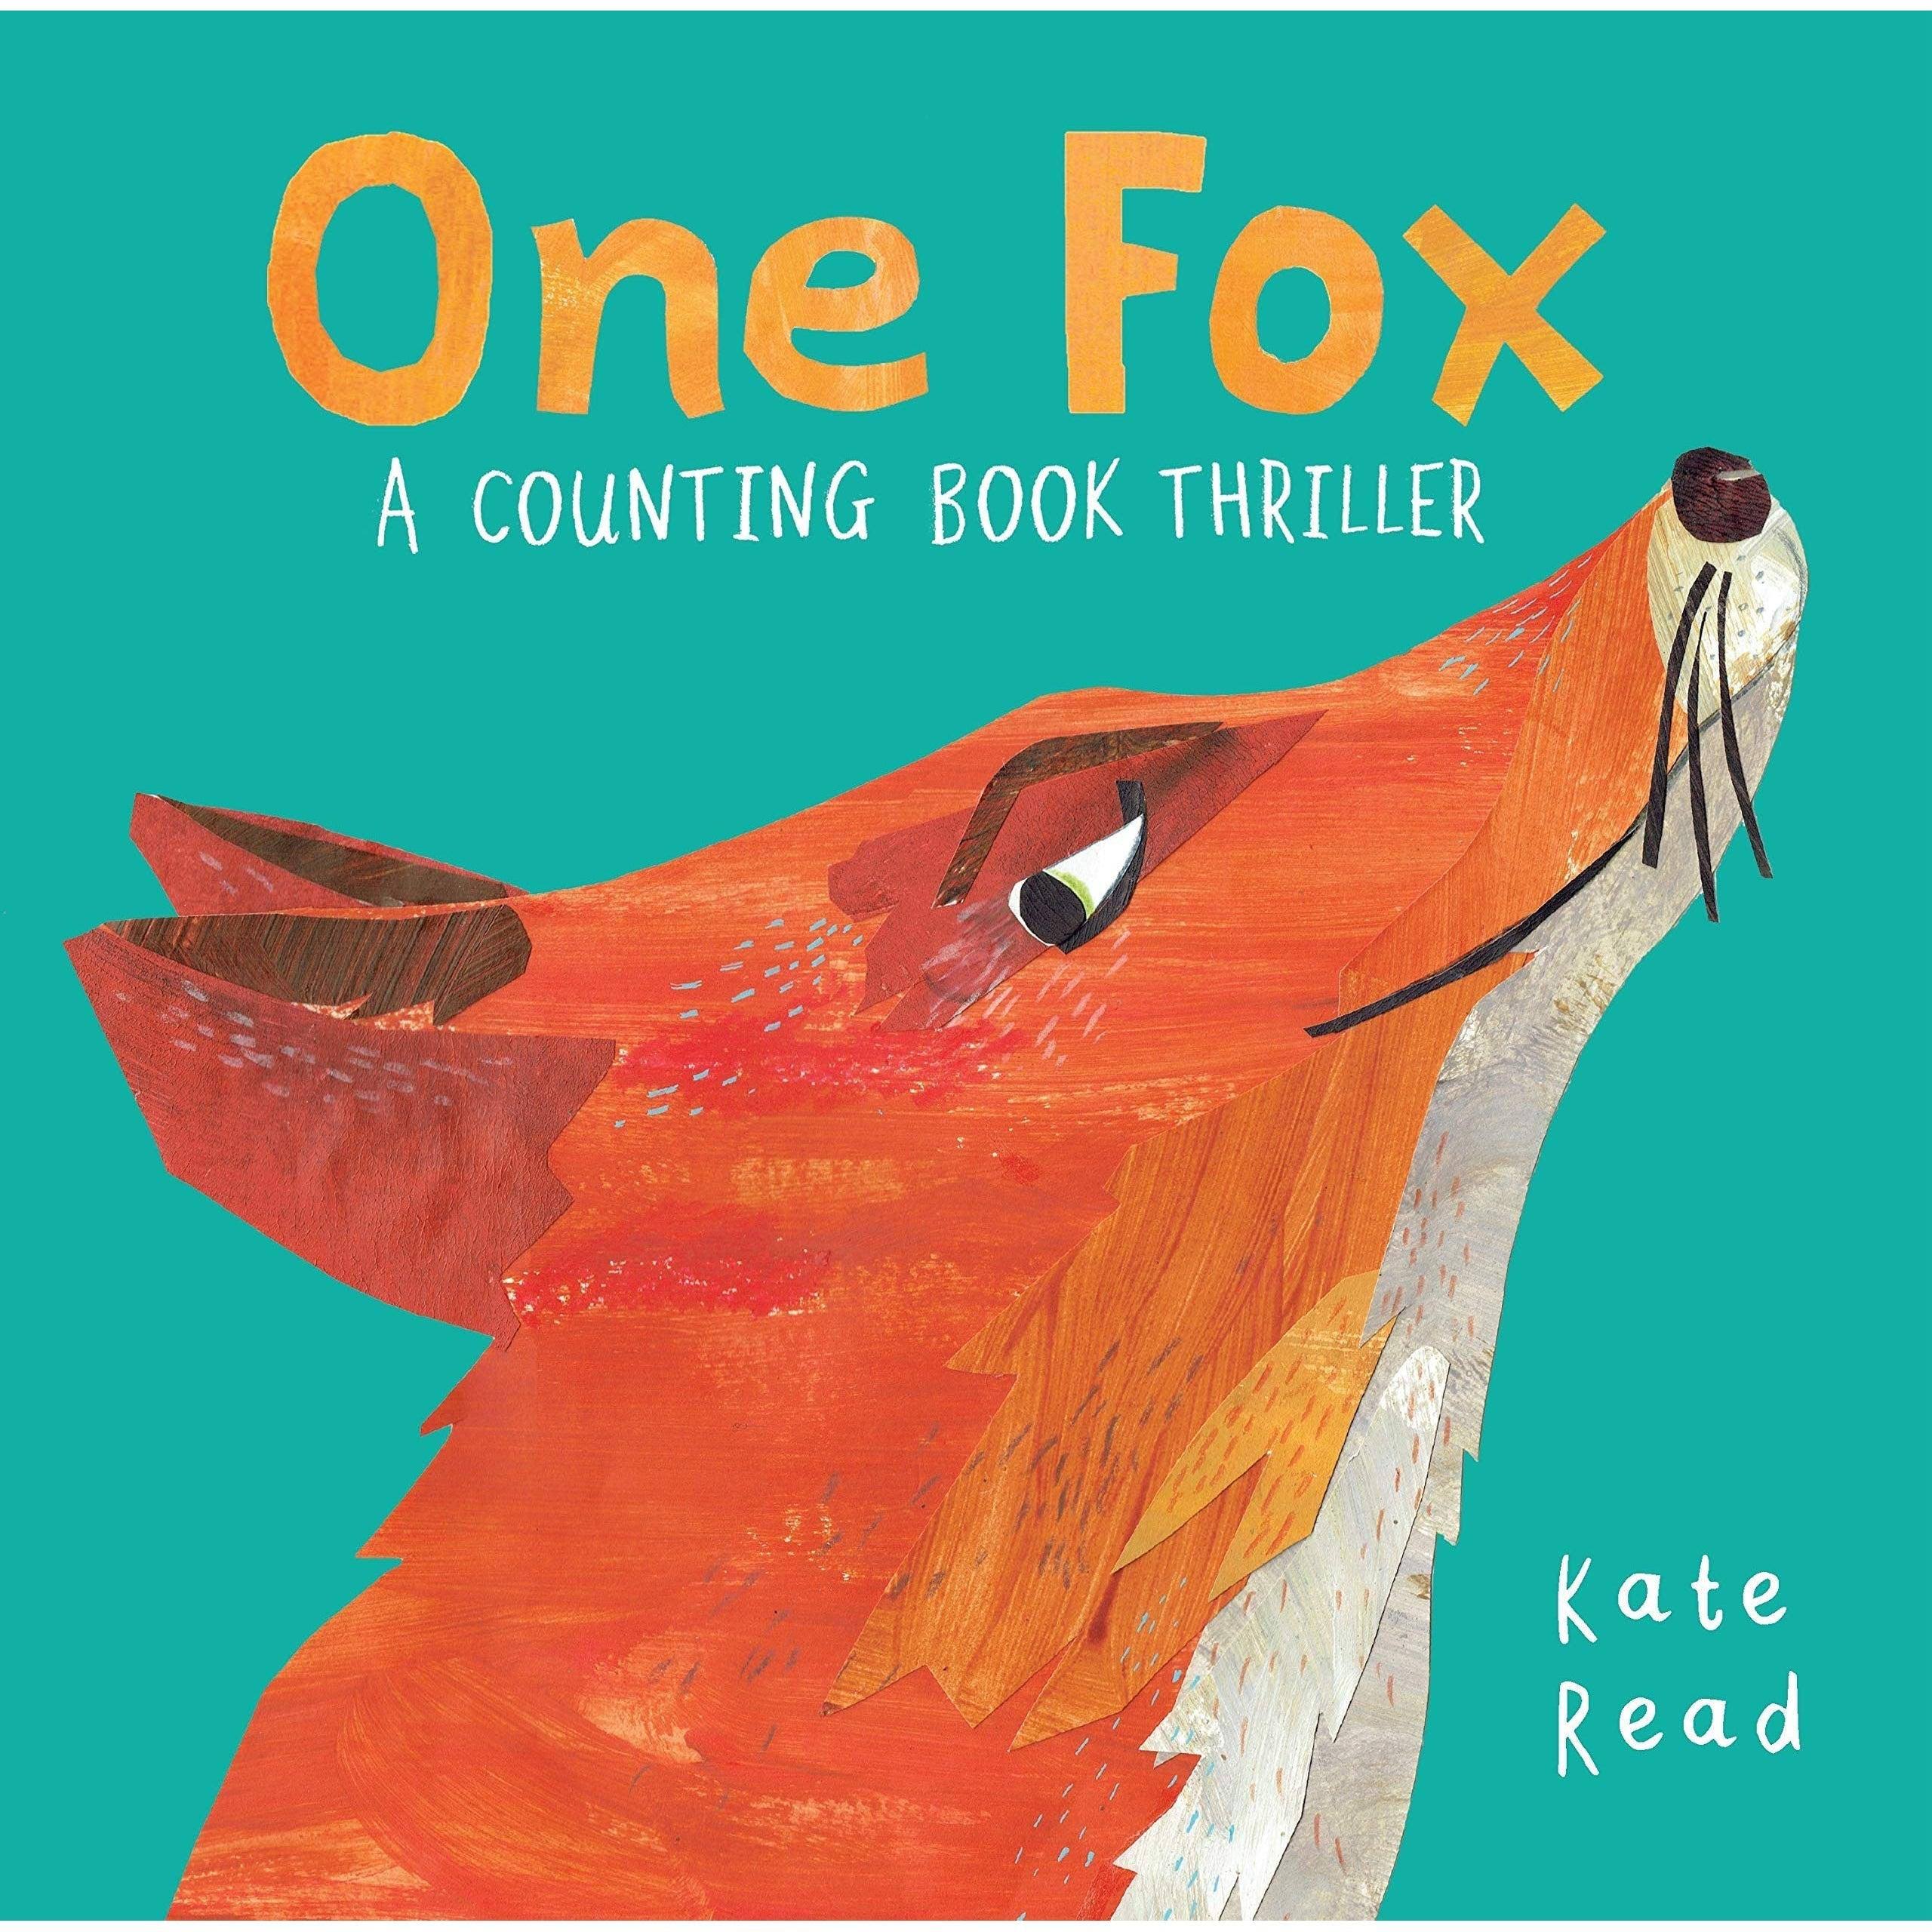 One Fox: A Counting Book Thriller [Book]